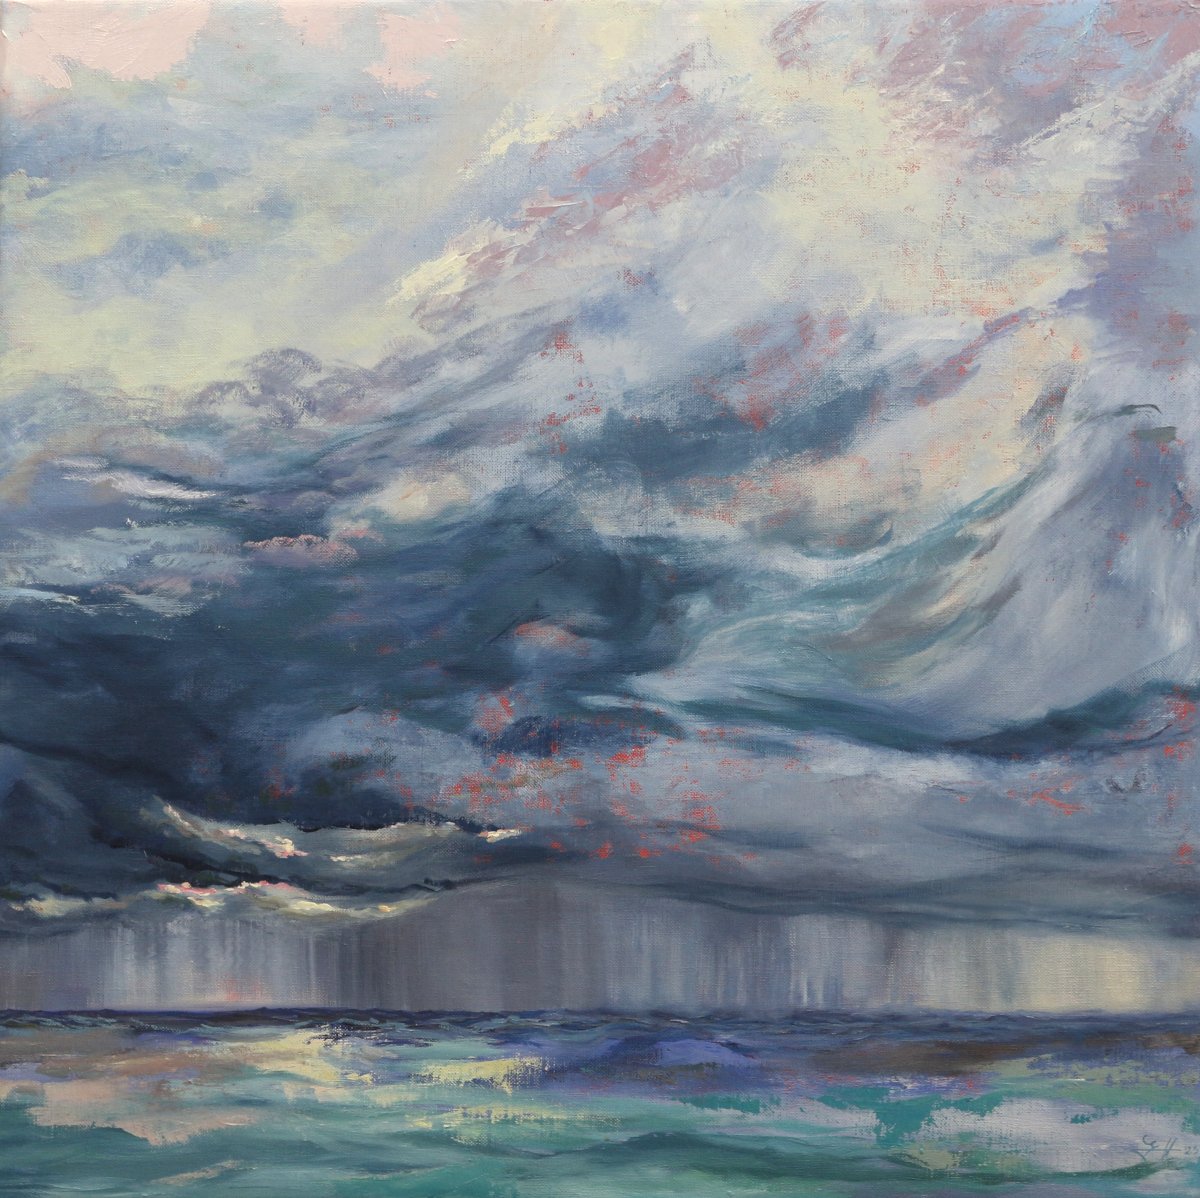 Tormenta - painting oil on canvas